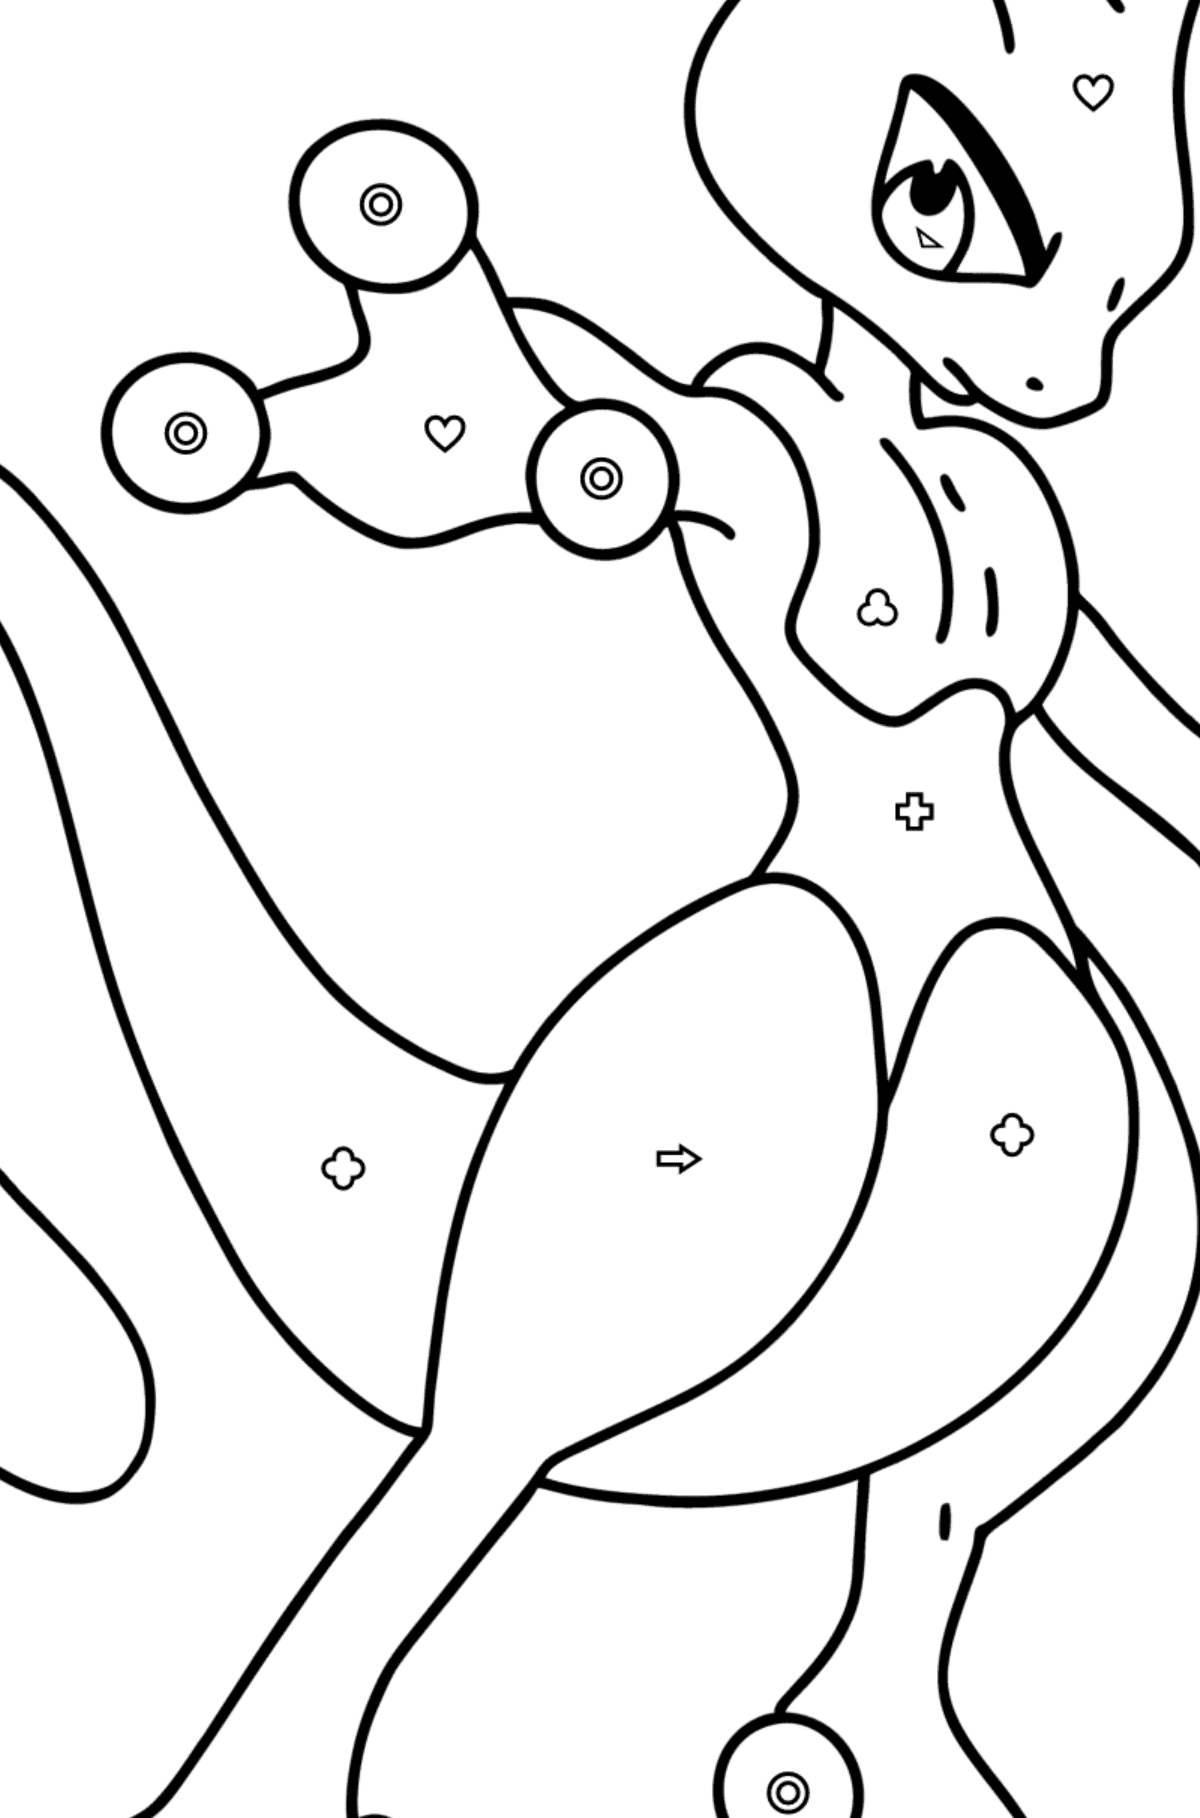 Coloring page Pokemon Go Mewtwo - Coloring by Geometric Shapes for Kids